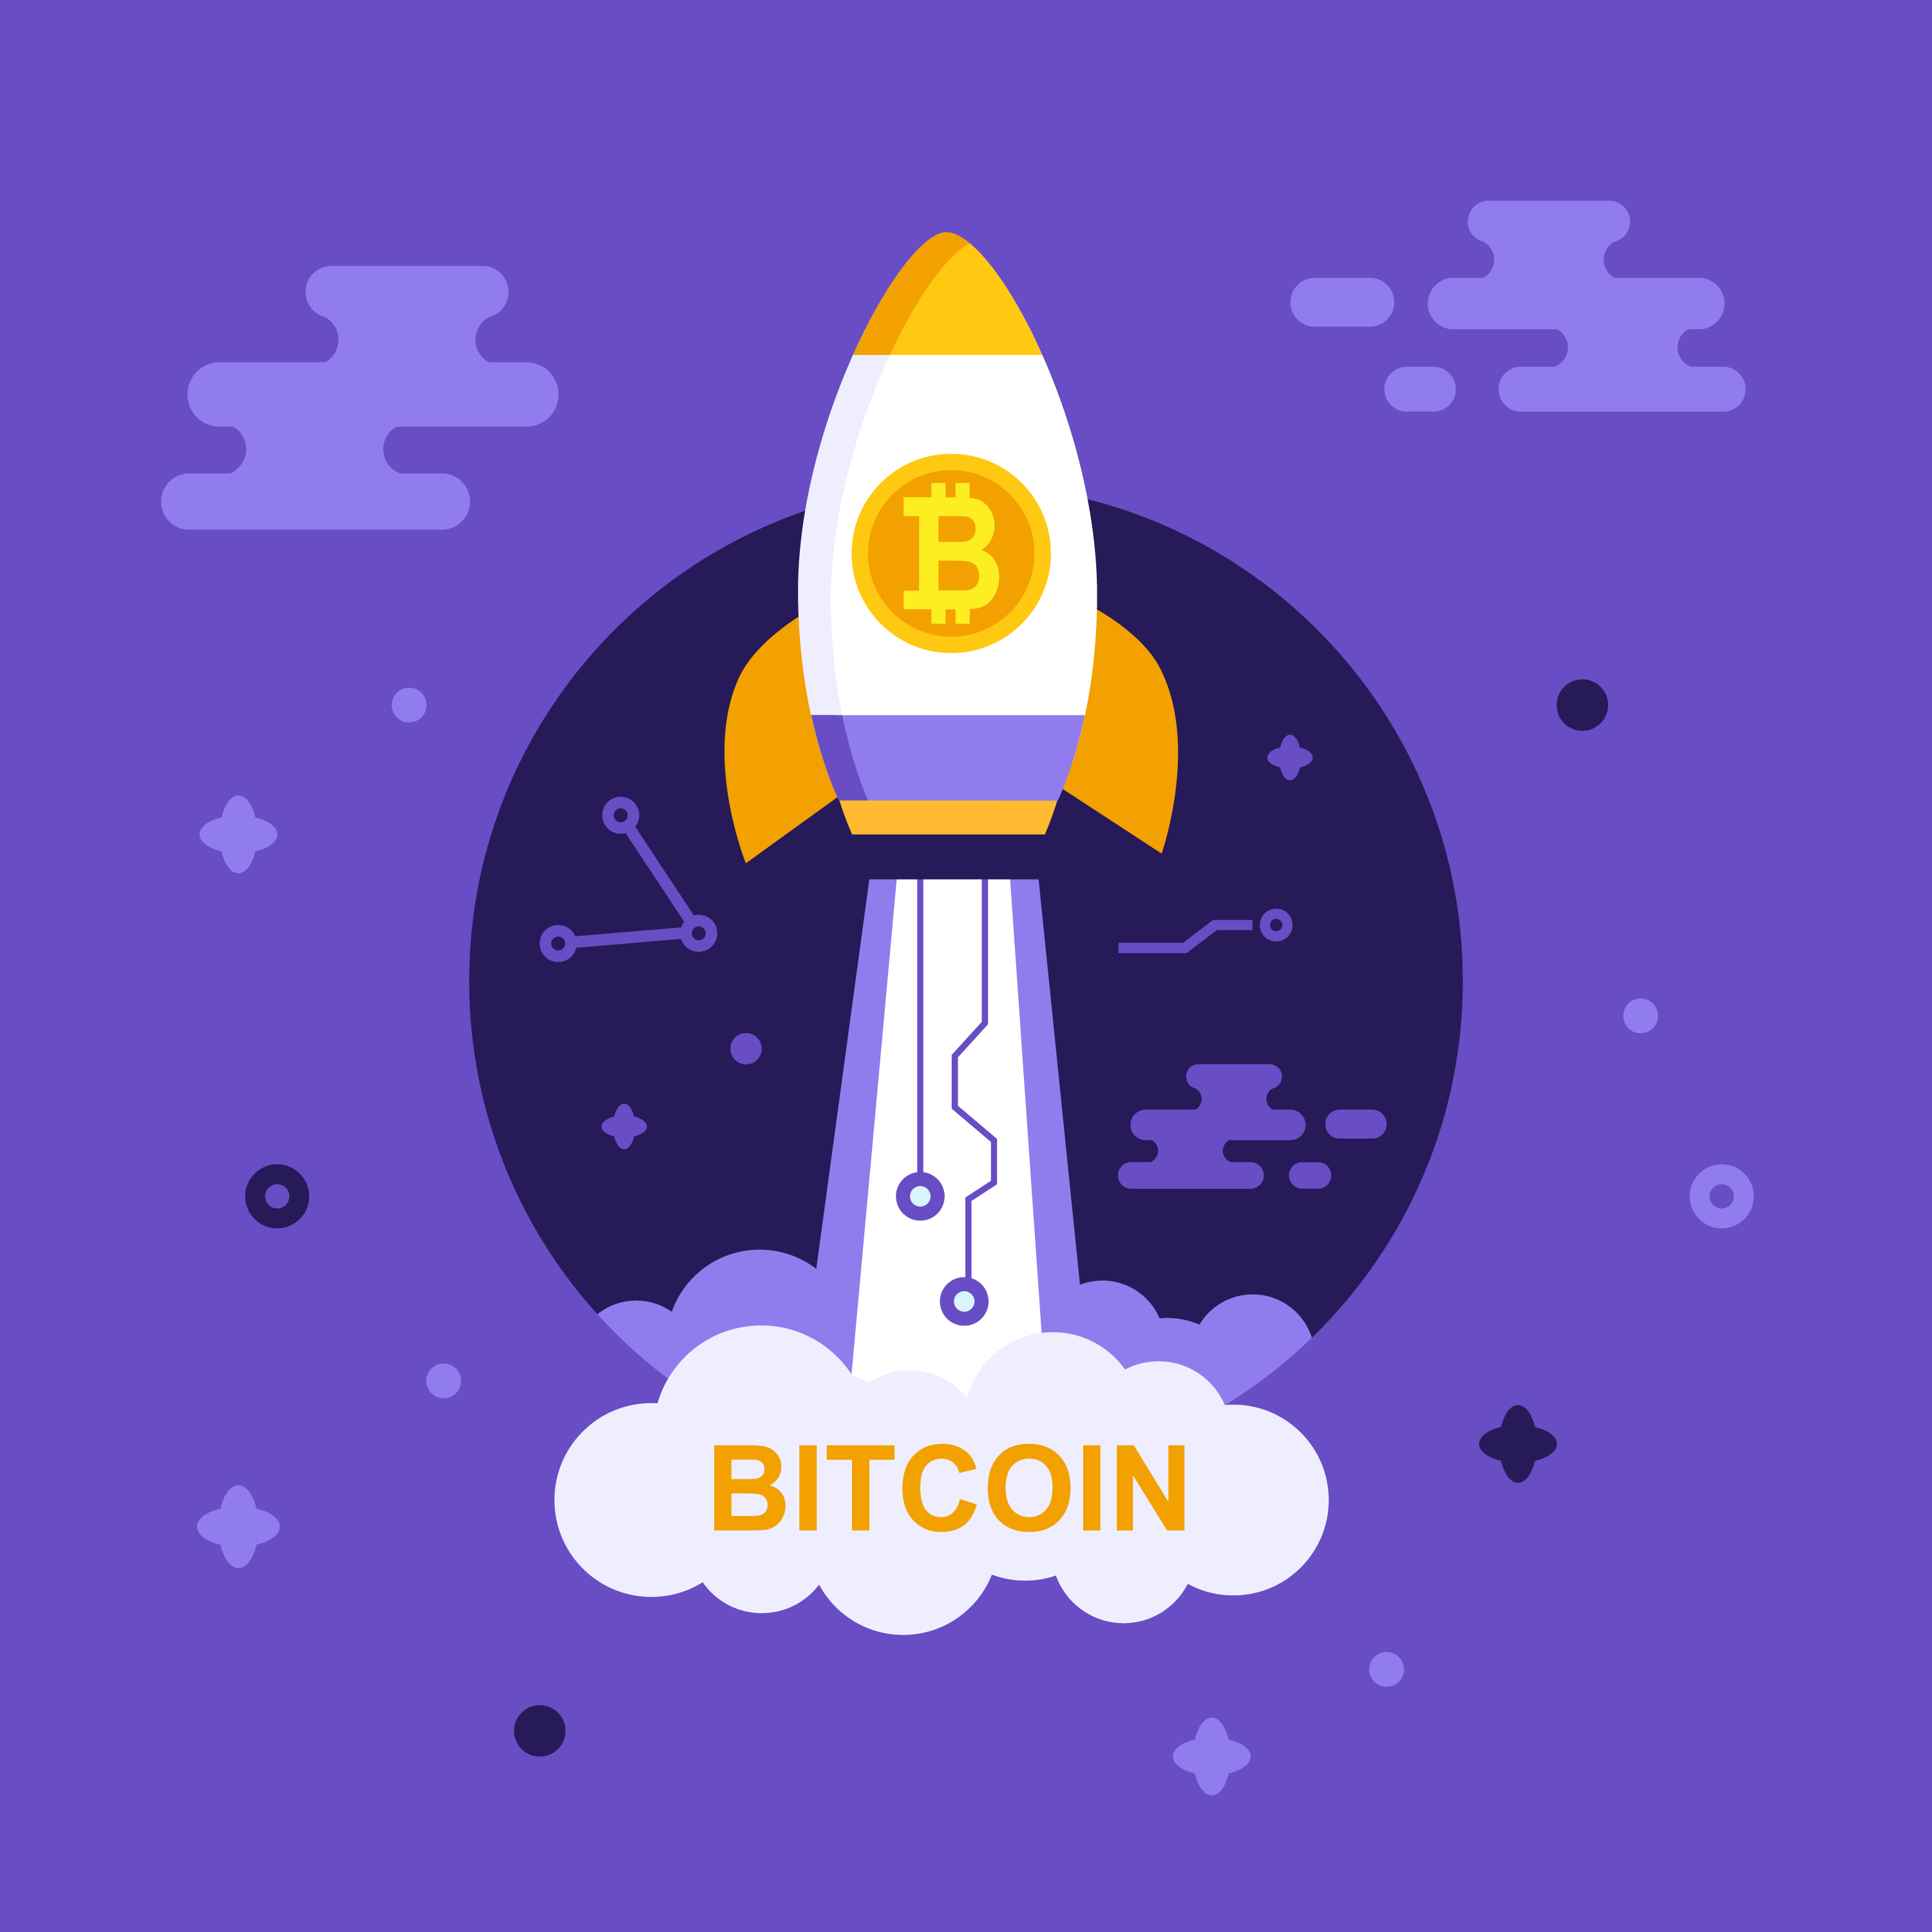 Is Bitcoin about to take off like a rocket ship? And if it does, will the Bitcoin dream die?